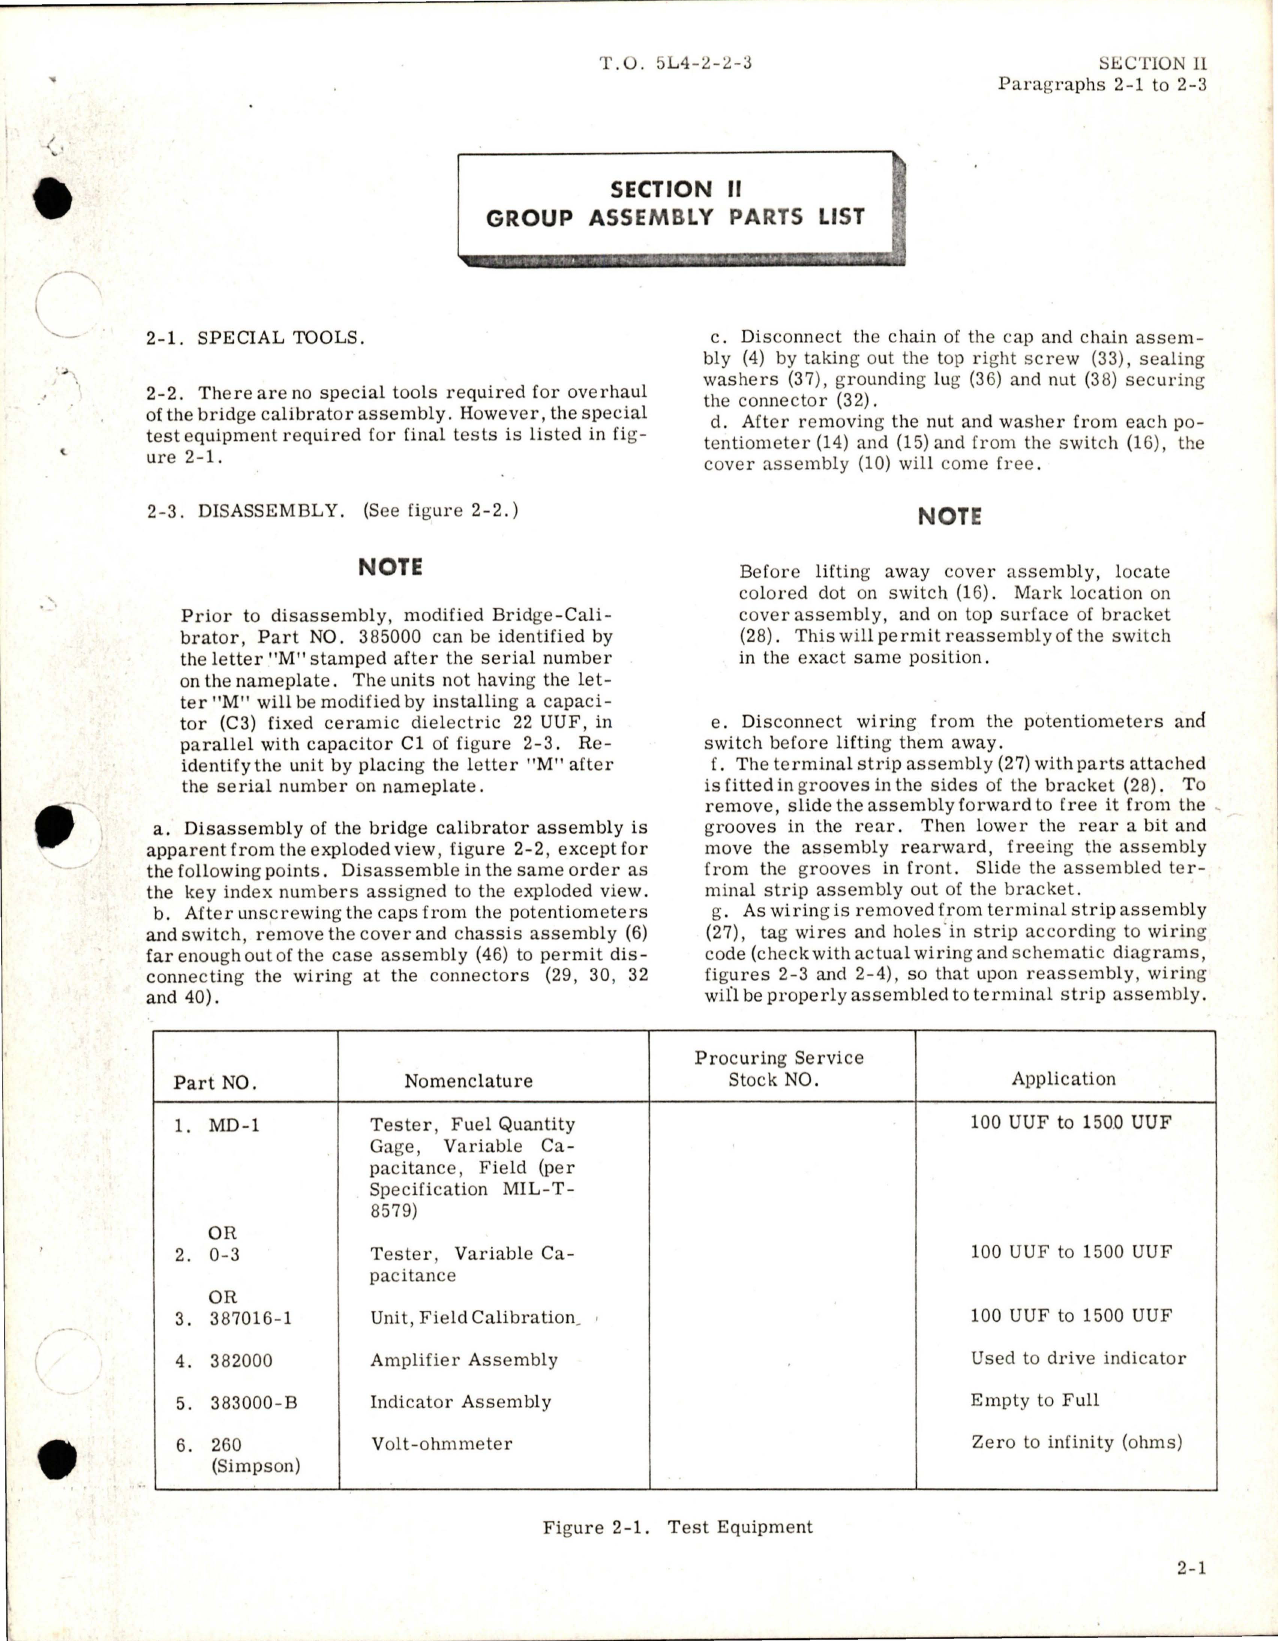 Sample page 7 from AirCorps Library document: Overhaul for Bridge Calibrator Assemblies - Capacitor Fuel Gage System